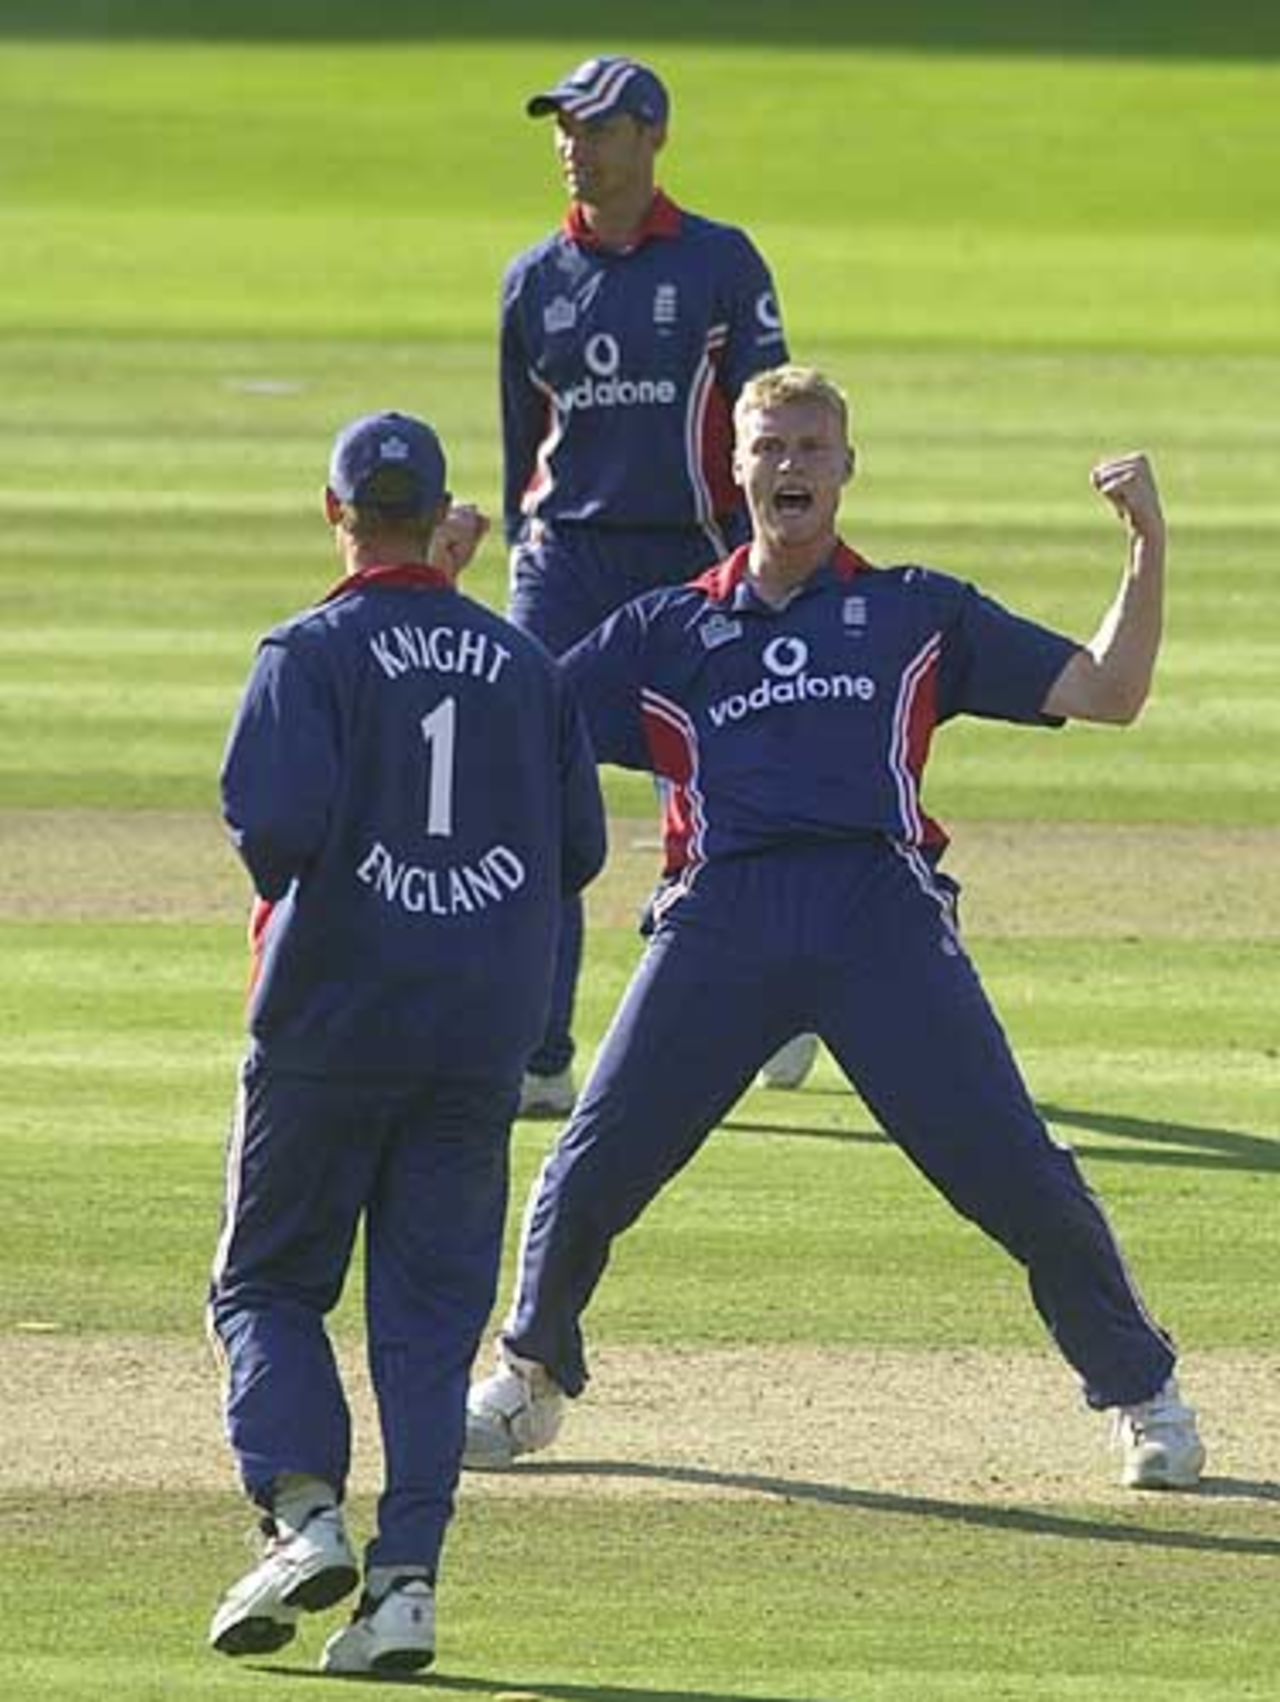 Flintoff has two wickets in an over and the scent of victory but..., NatWest Series Final at Lord's, 13th Jul 2002